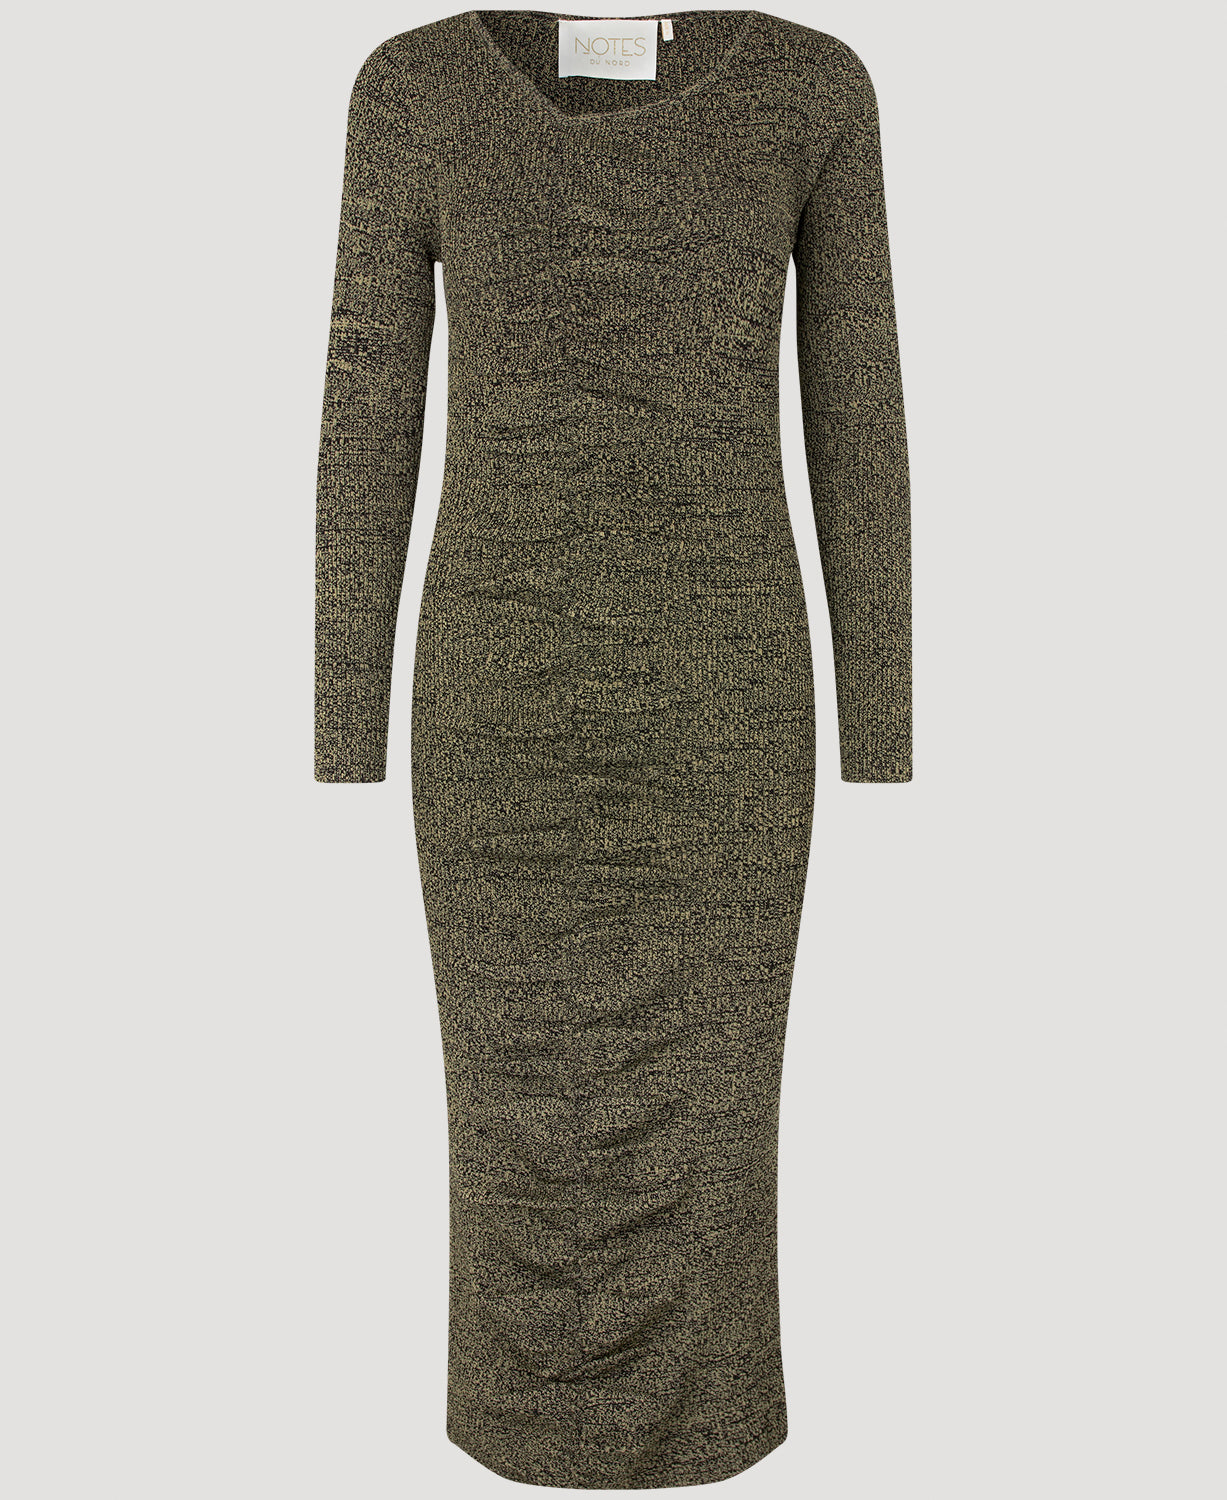 Notes du Nord Icon Knitted Dress Knitwear 428 Khaki